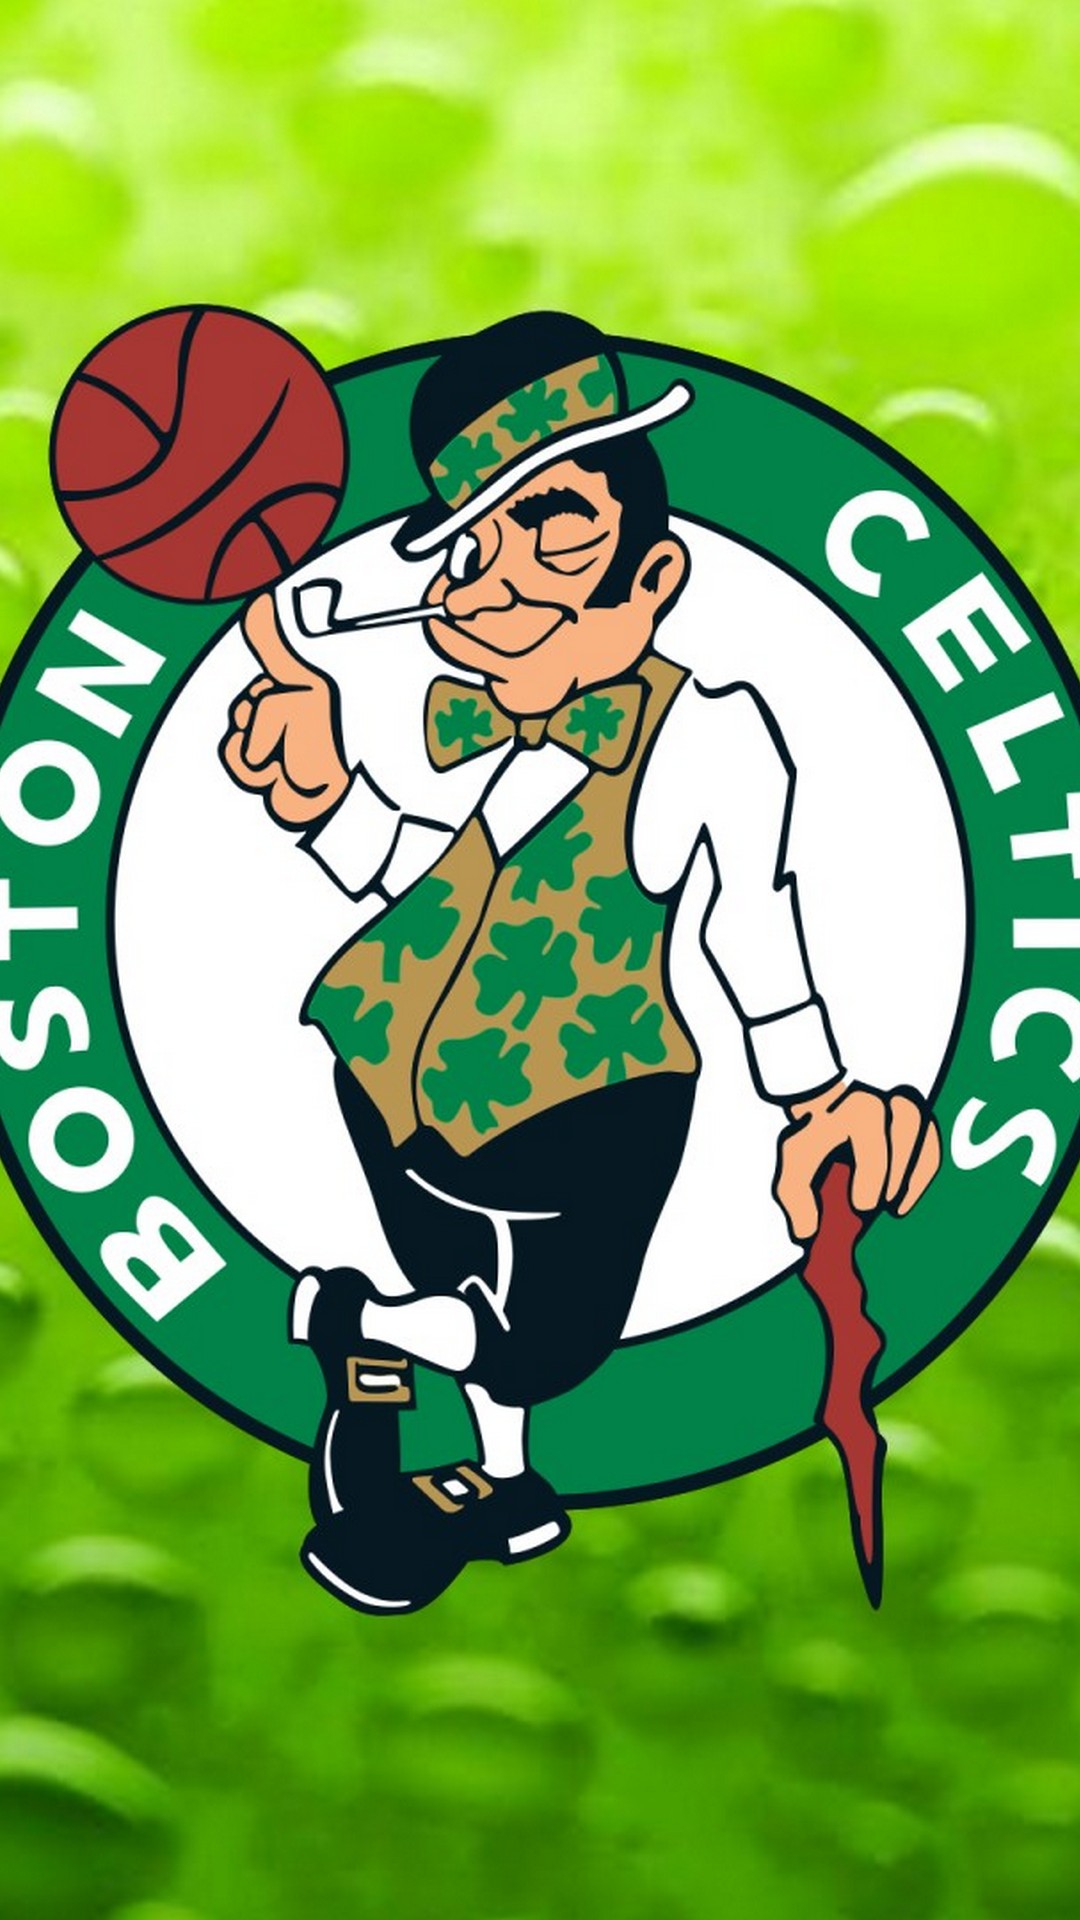 Boston Celtics Wallpaper For Phone With Resolution 1080X1920 pixel. You can make this wallpaper for your Desktop Computer Backgrounds, Mac Wallpapers, Android Lock screen or iPhone Screensavers